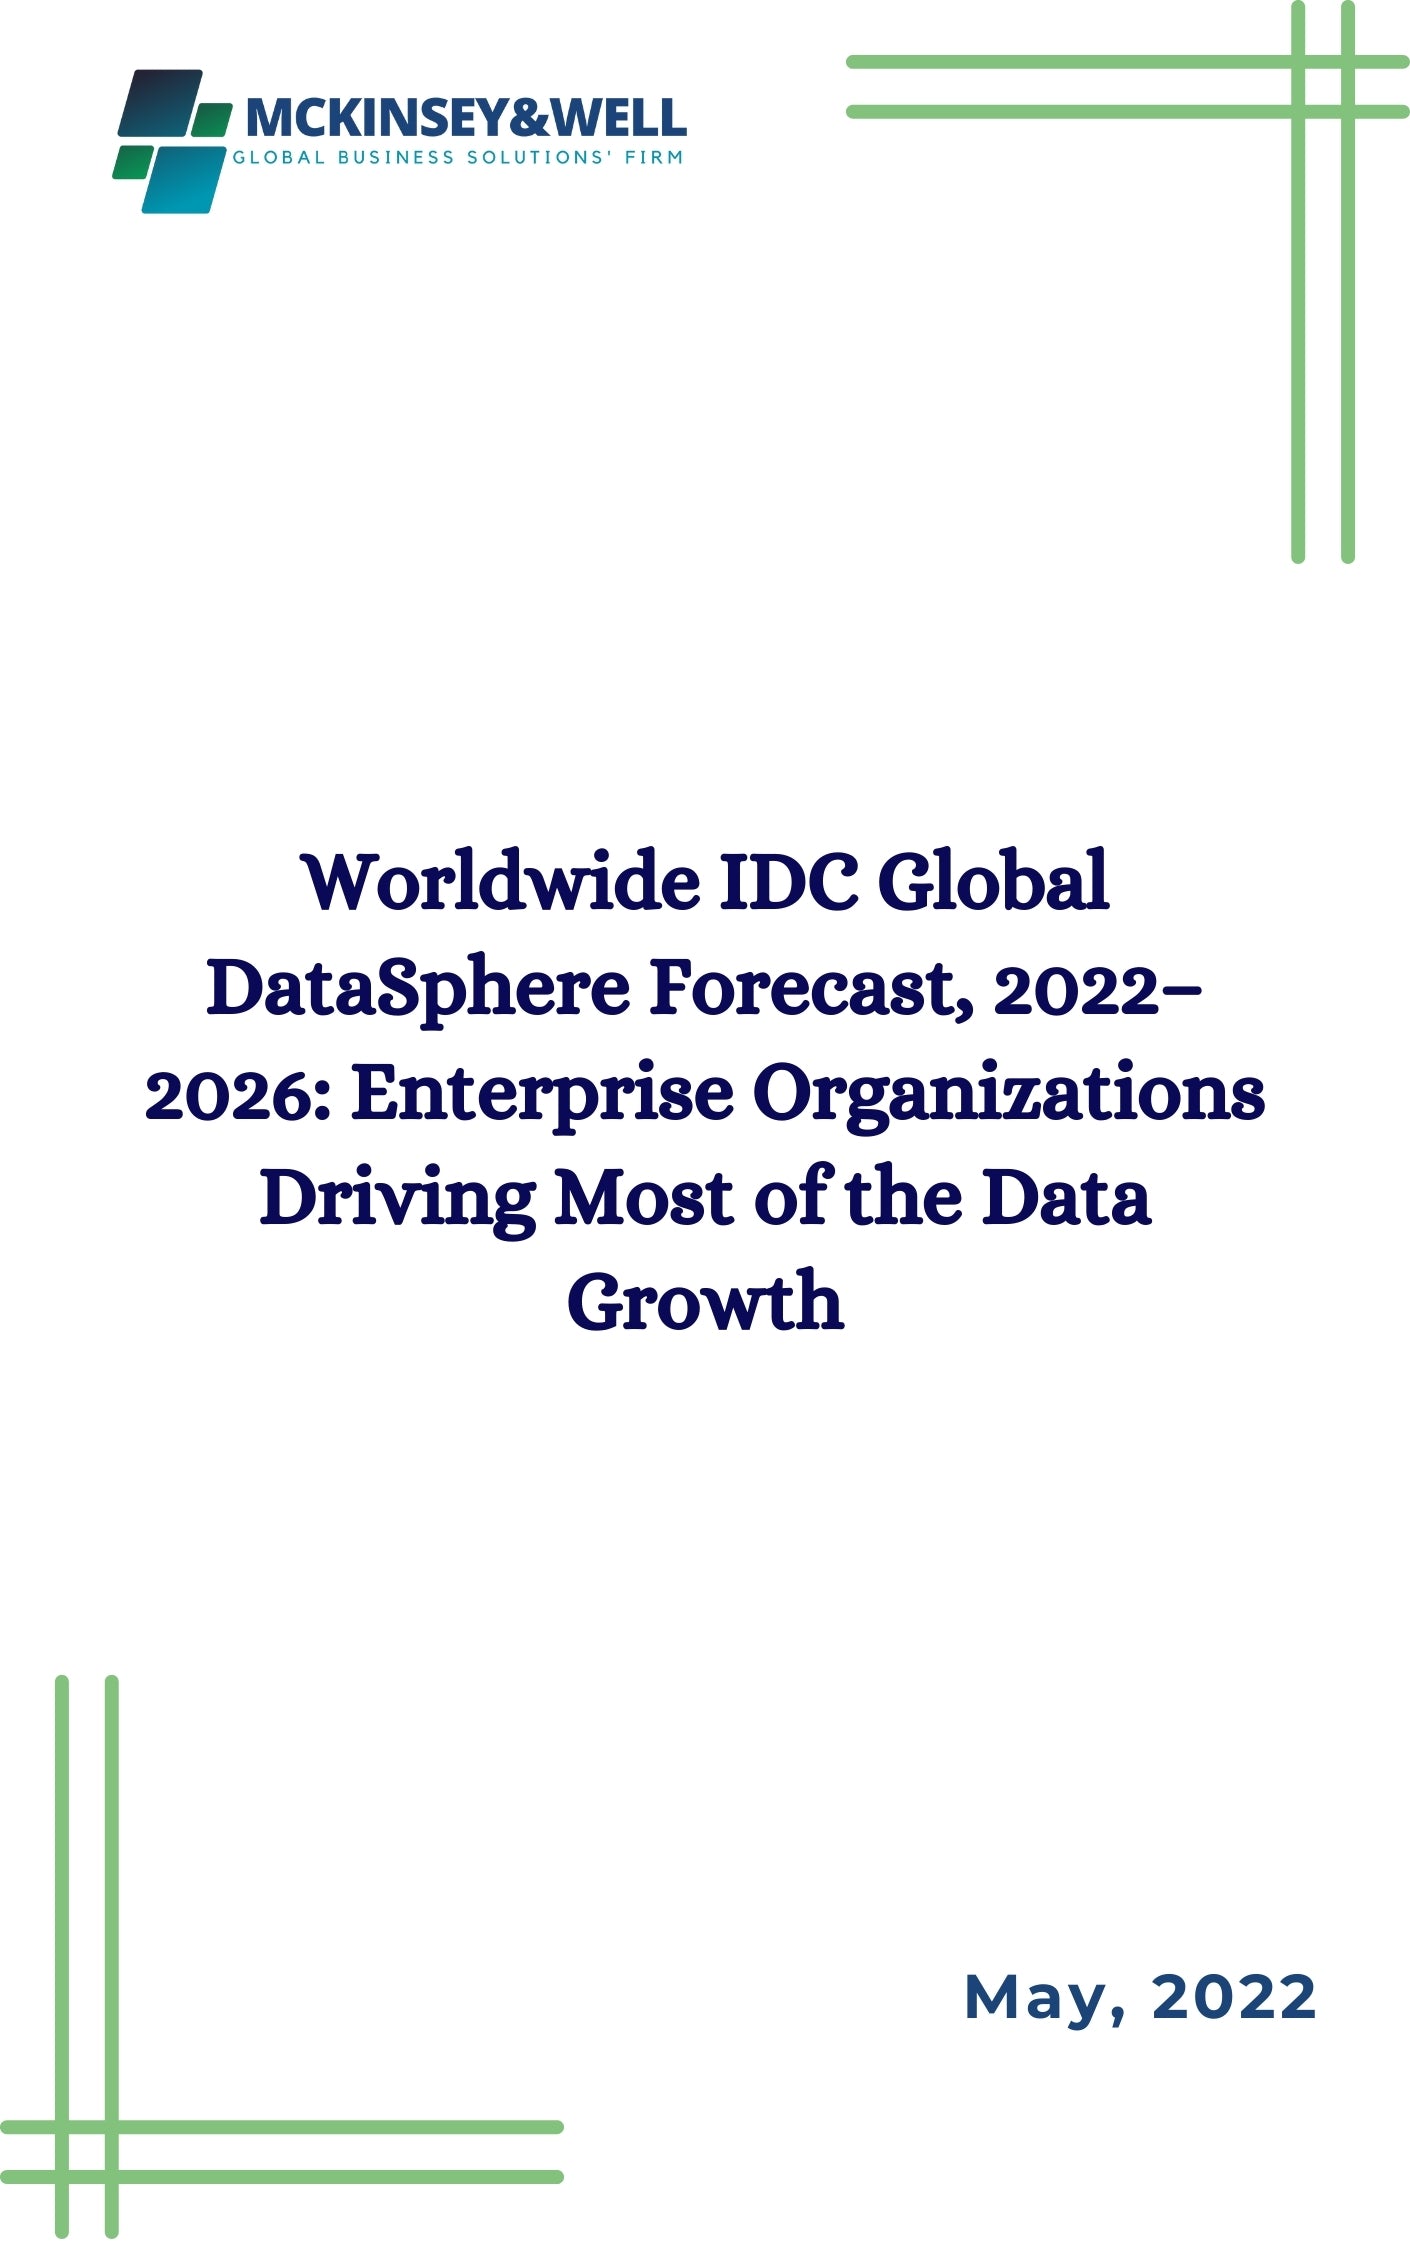 Worldwide IDC Global DataSphere Forecast, 2022–2026: Enterprise Organizations Driving Most of the Data Growth